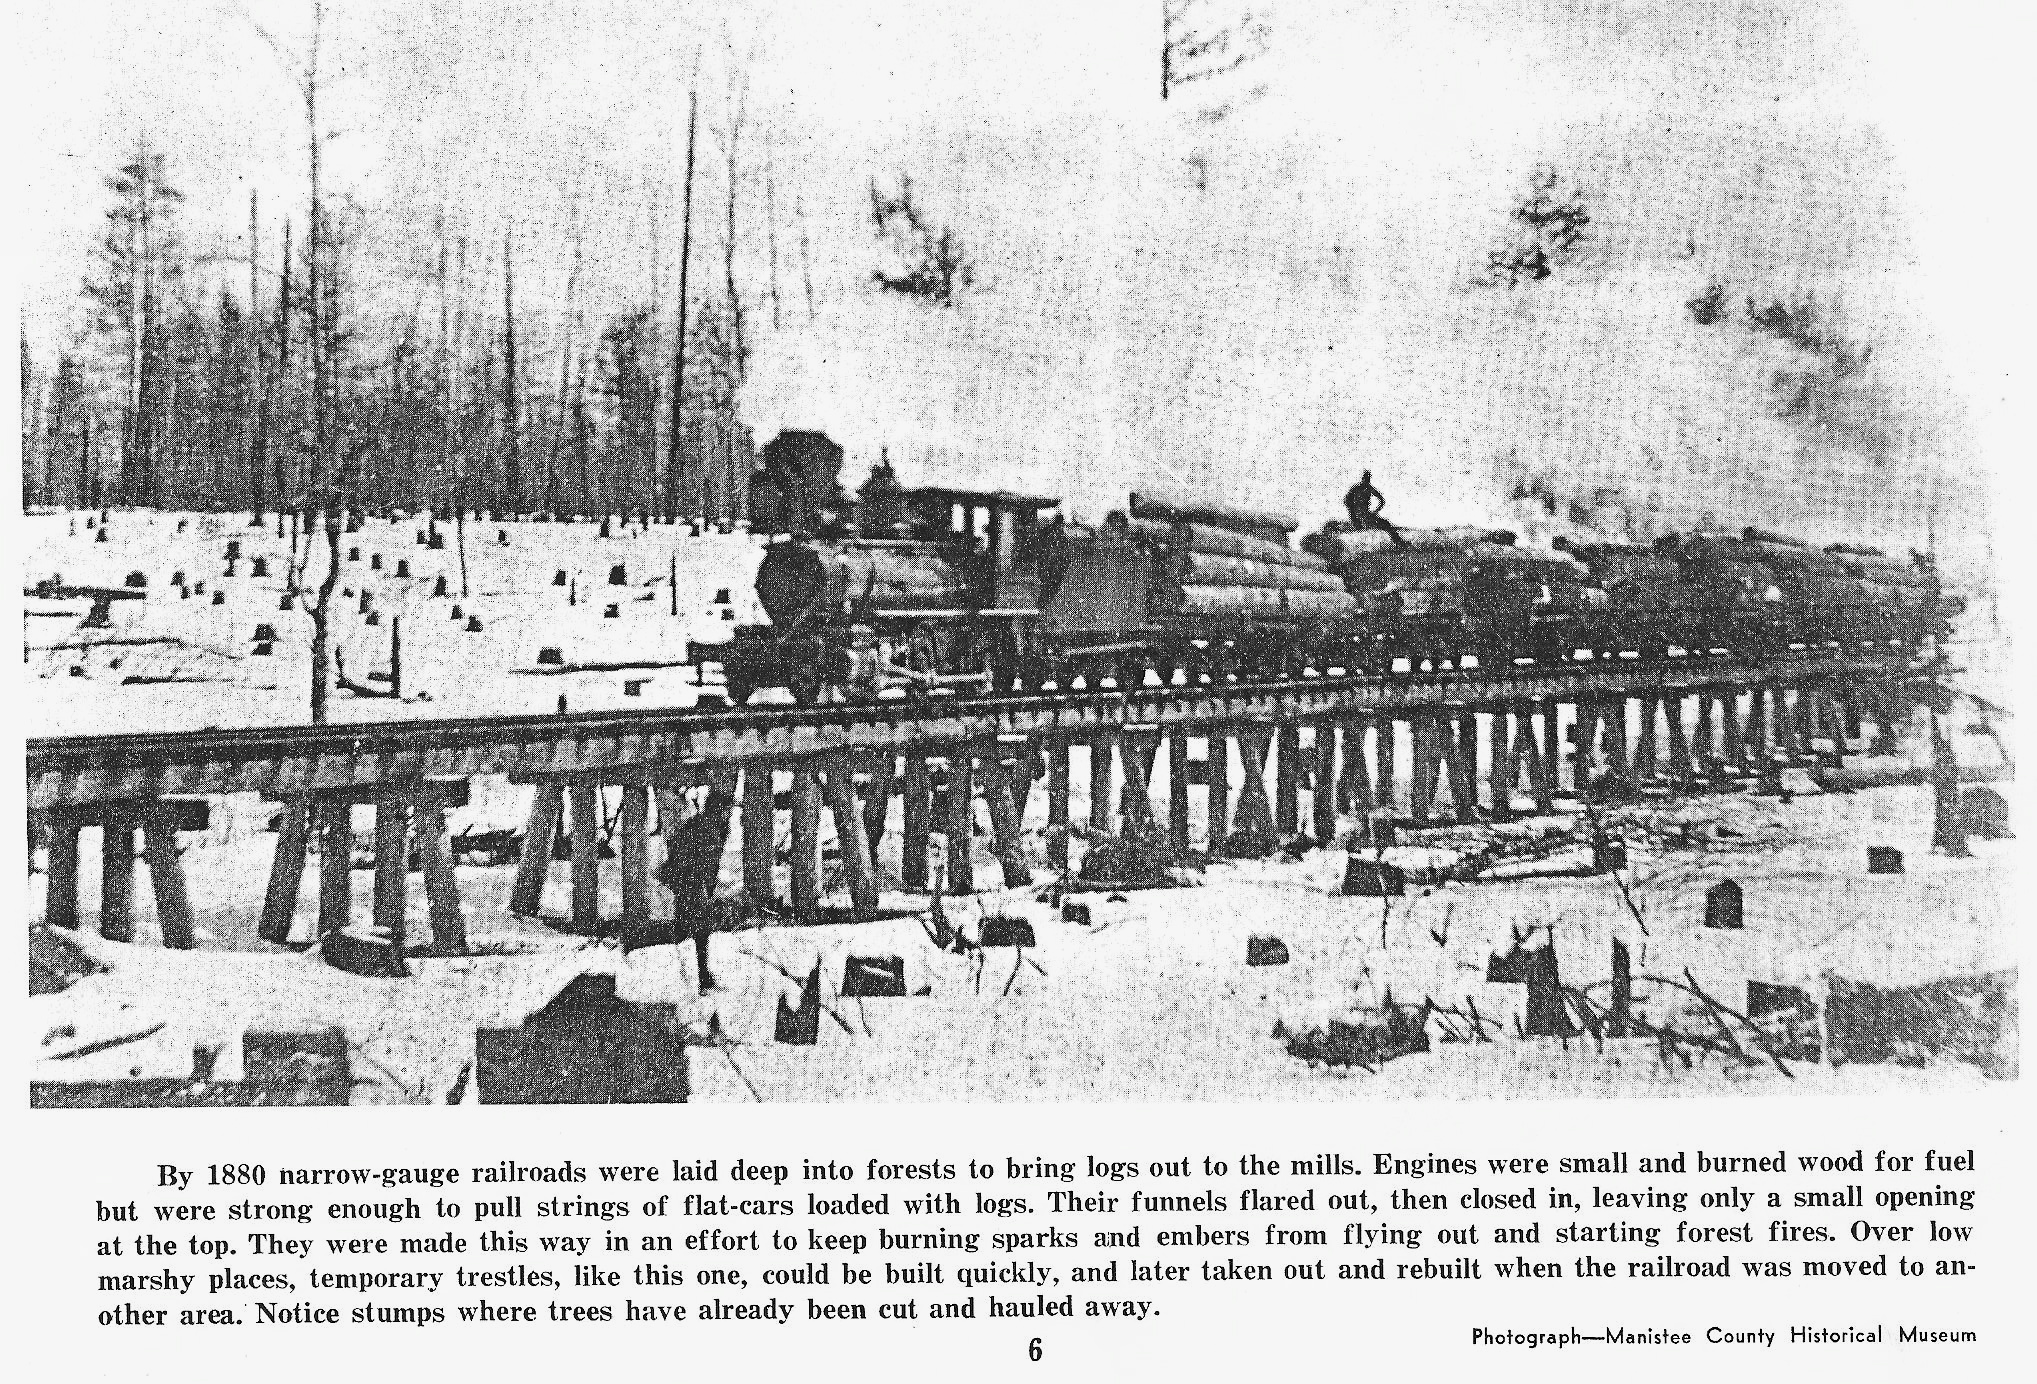 Logging Train on an Elevated Track